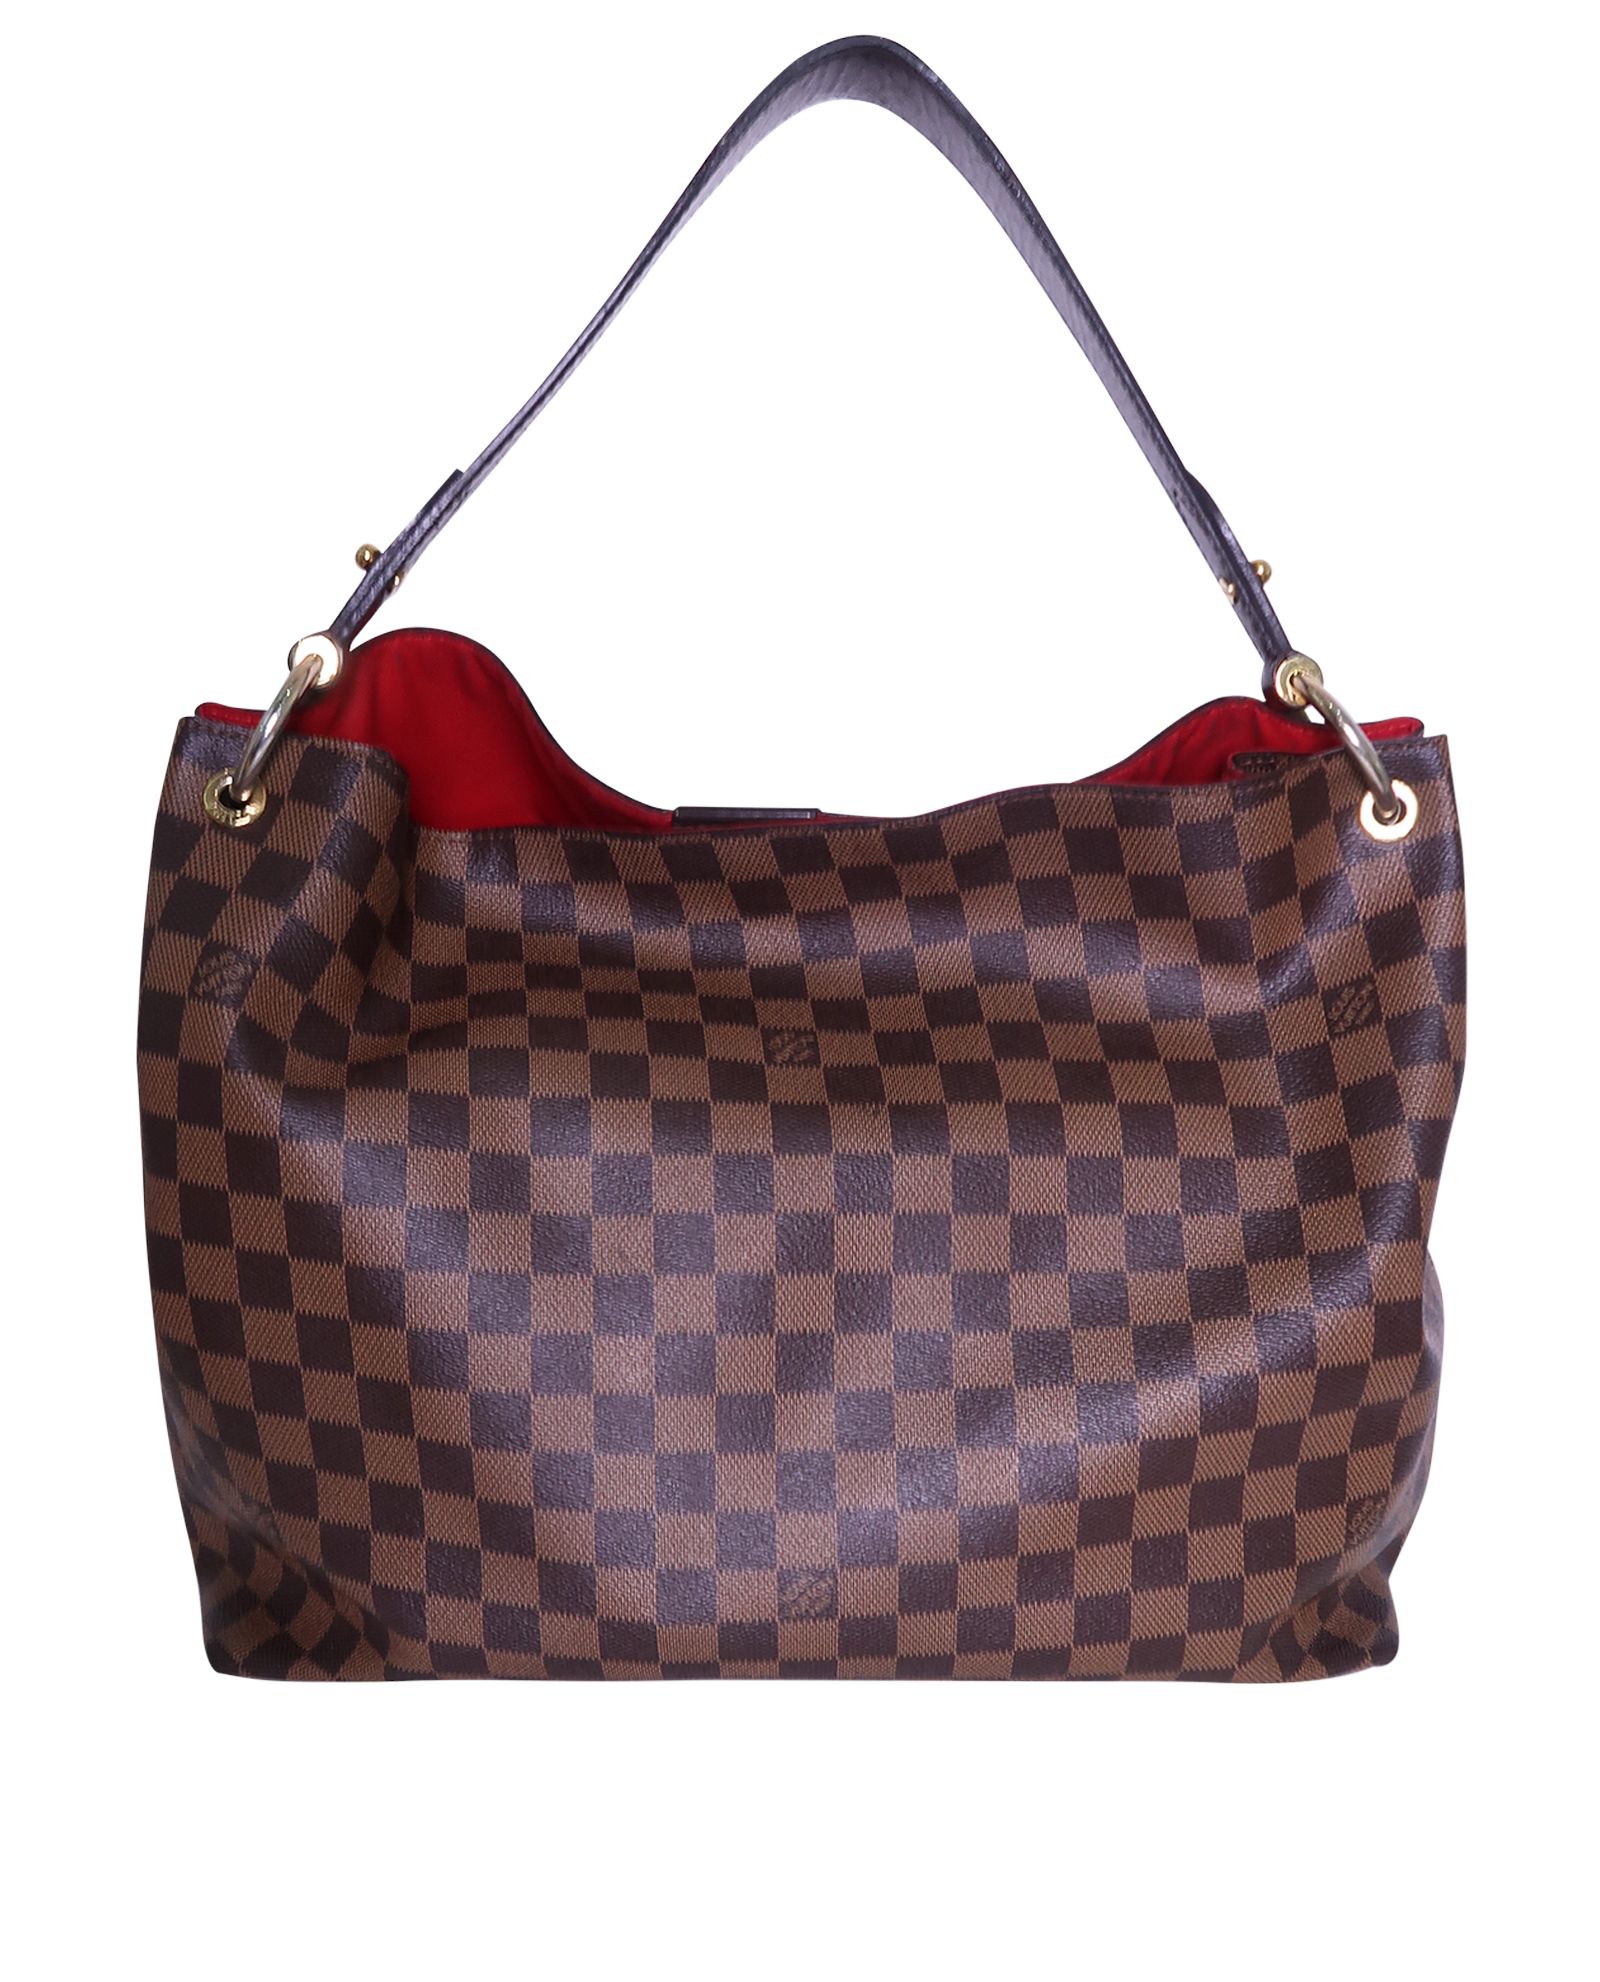 Louis Vuitton - Authenticated Graceful Handbag - Leather Brown for Women, Good Condition